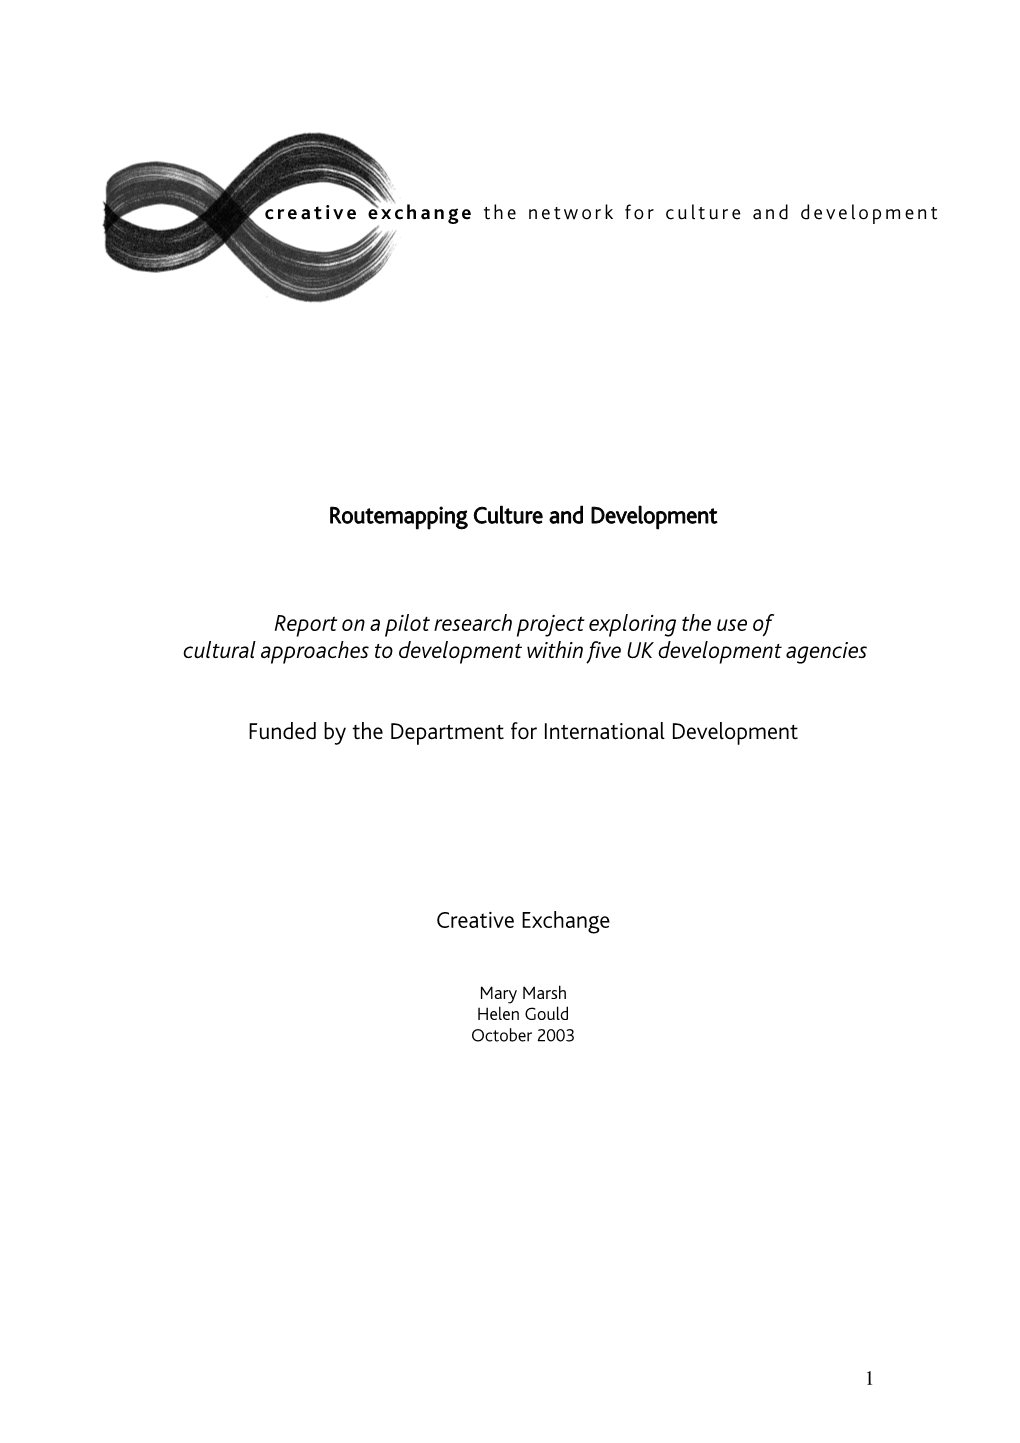 Routemapping Culture and Development Report on a Pilot Research Project Exploring the Use of Cultural Approaches to Development